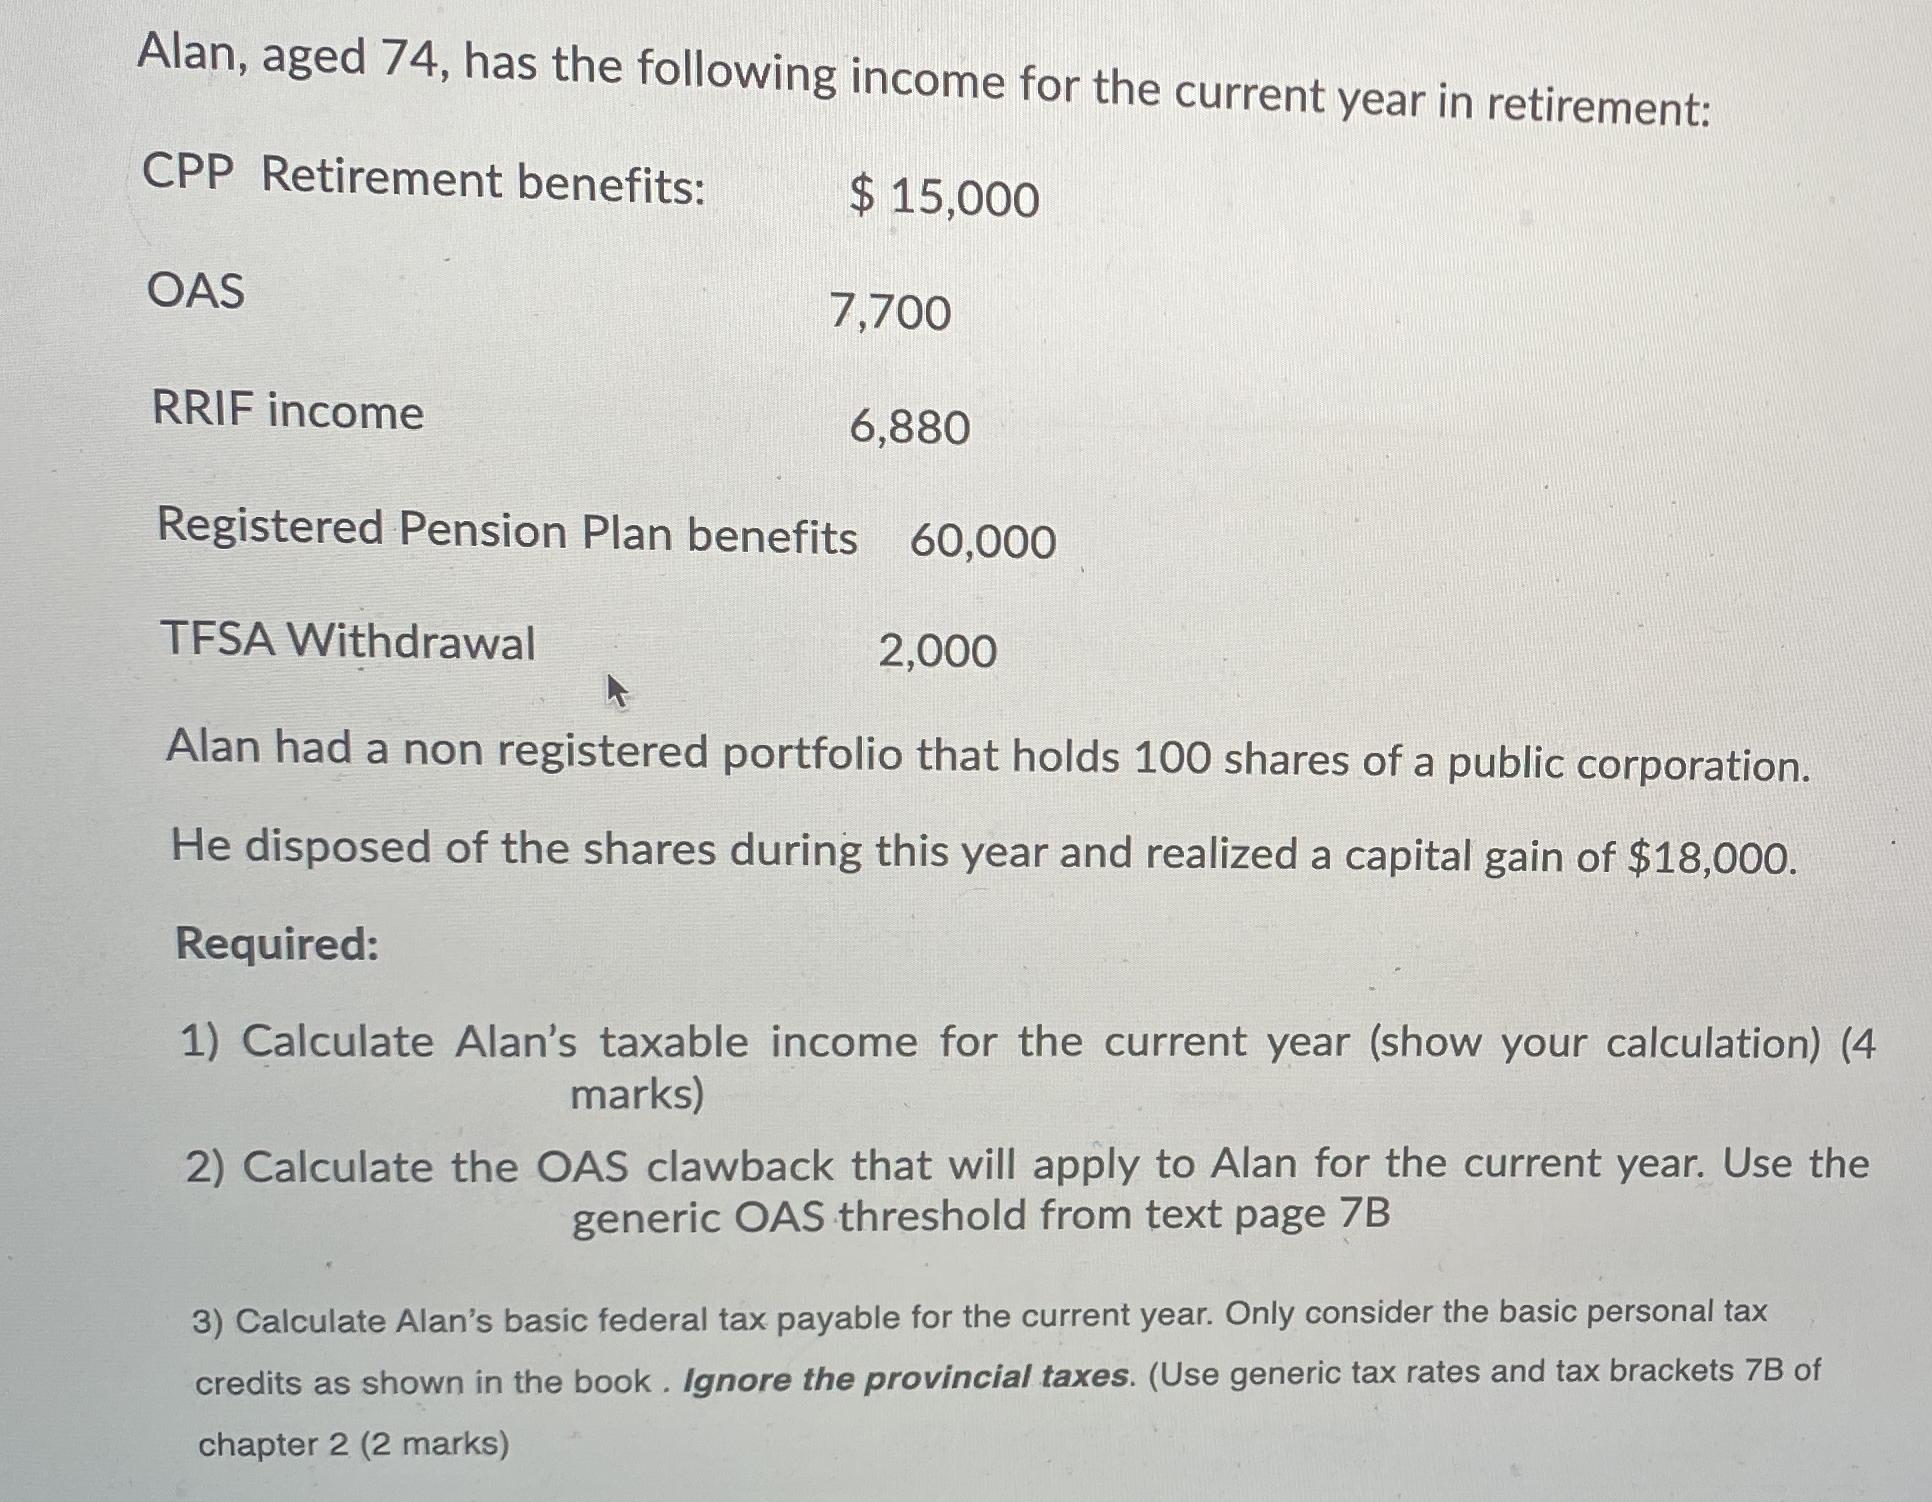 Alan, aged 74, has the following income for the current year in retirement: CPP Retirement benefits: $ 15,000